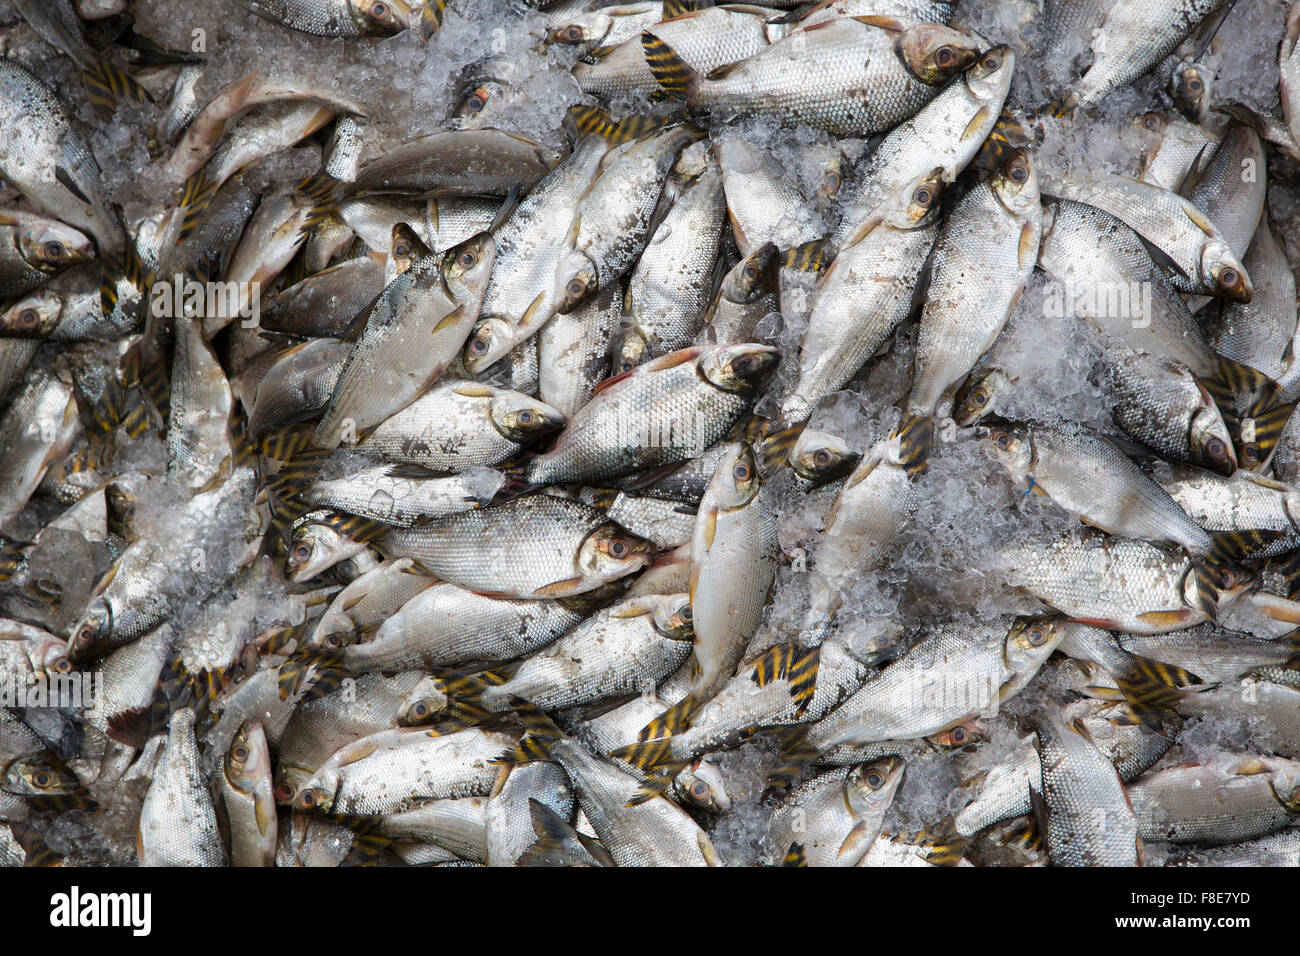 Background of large group of fish in ices seen from above at the fish market of Manaus, Brazil 2015 Stock Photo